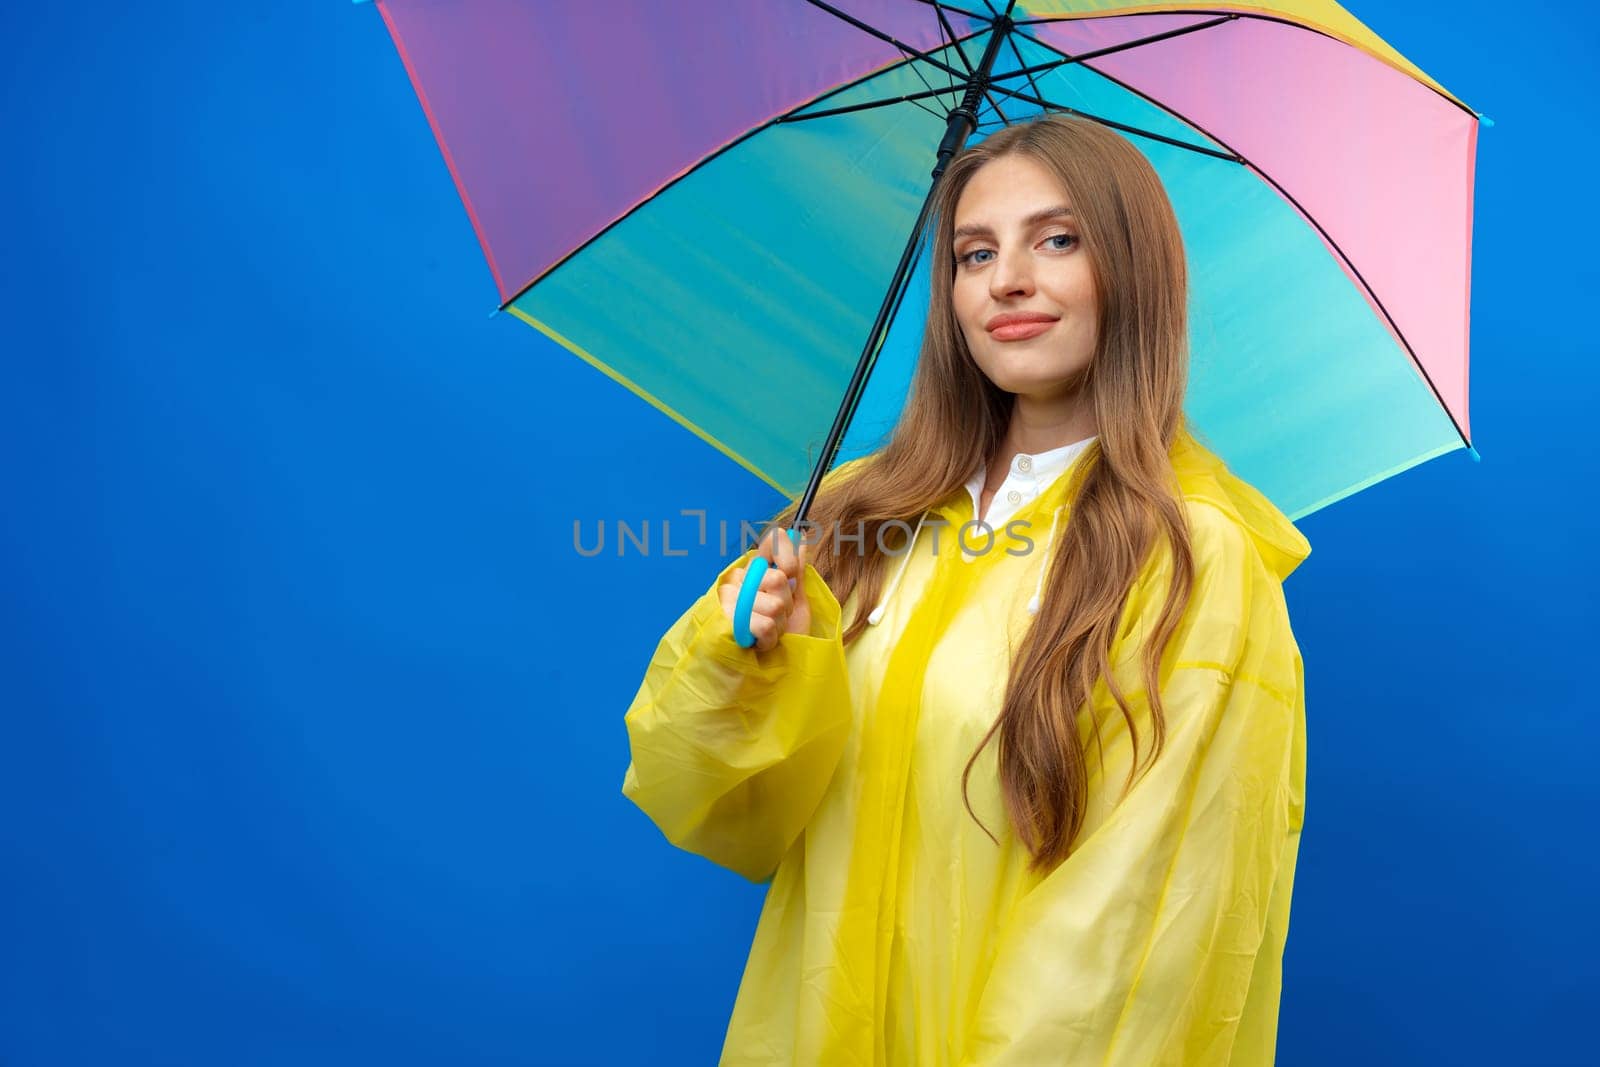 Young blonde woman wearing yellow raincoat smiling at camera over blue background in studio, close up